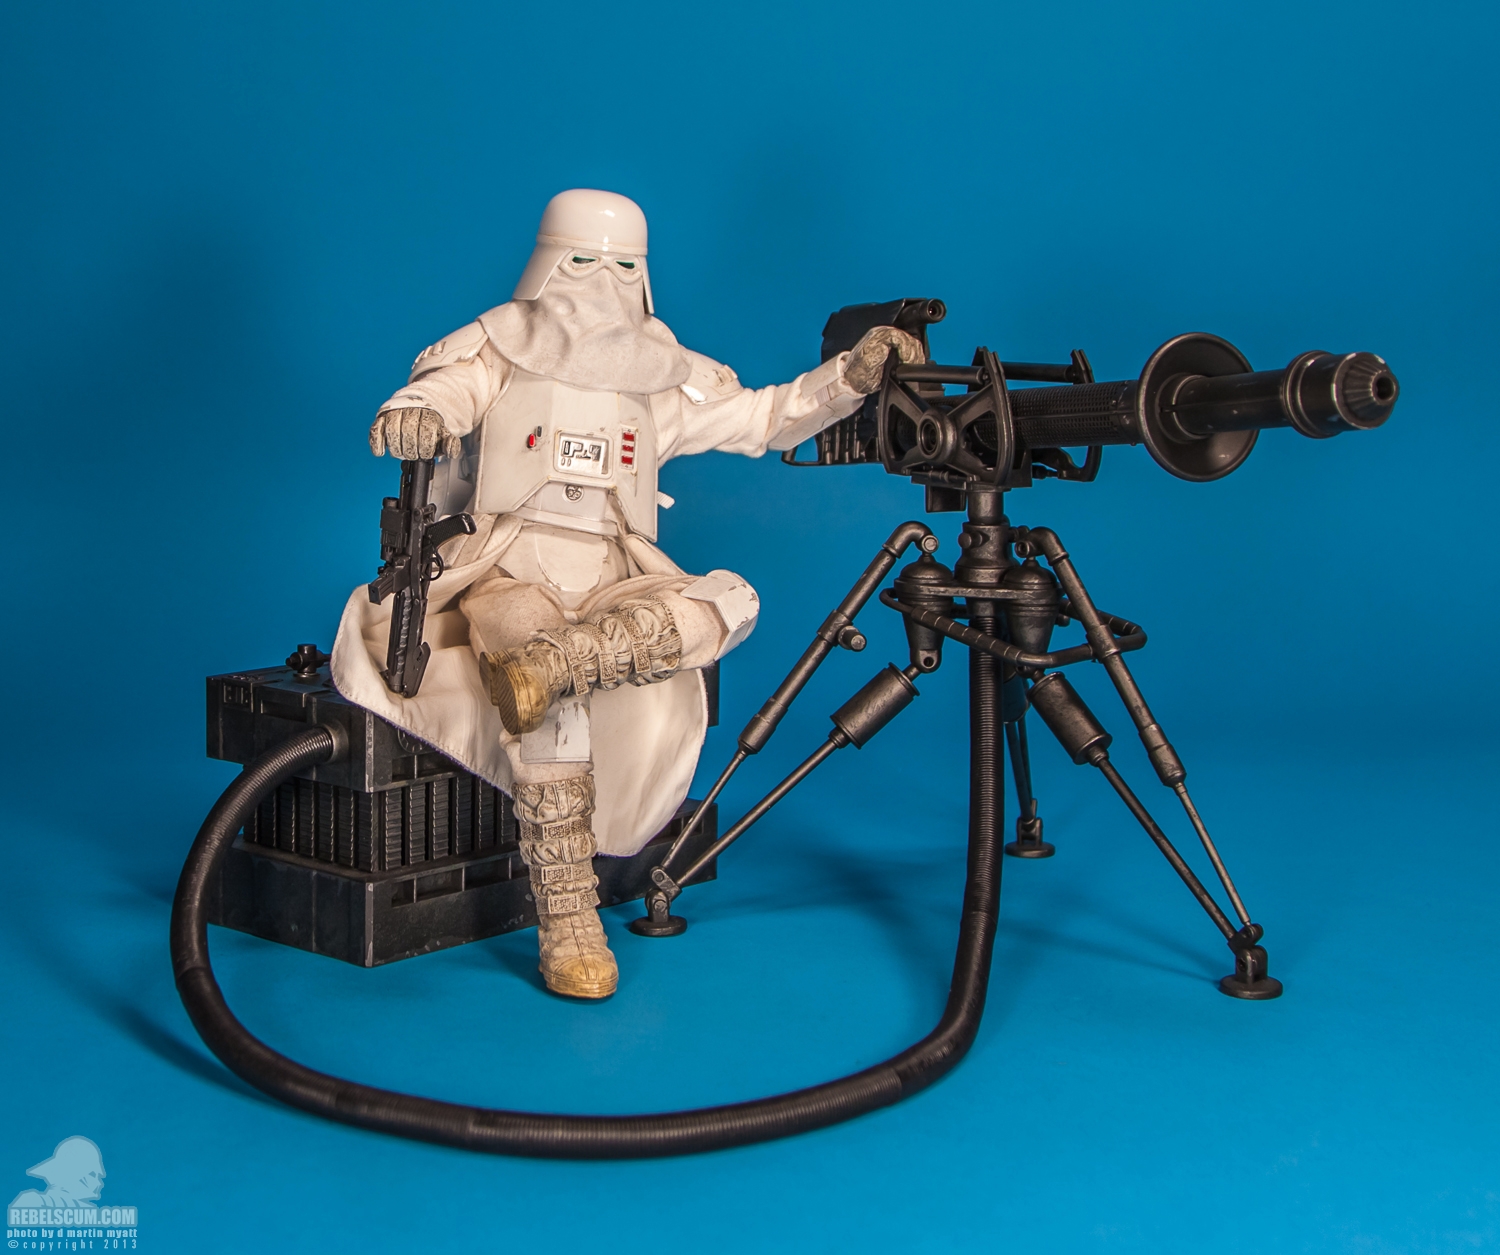 Snowtrooper_Militaries_Of_Star_Wars_Sideshow_Collectibles-17.jpg